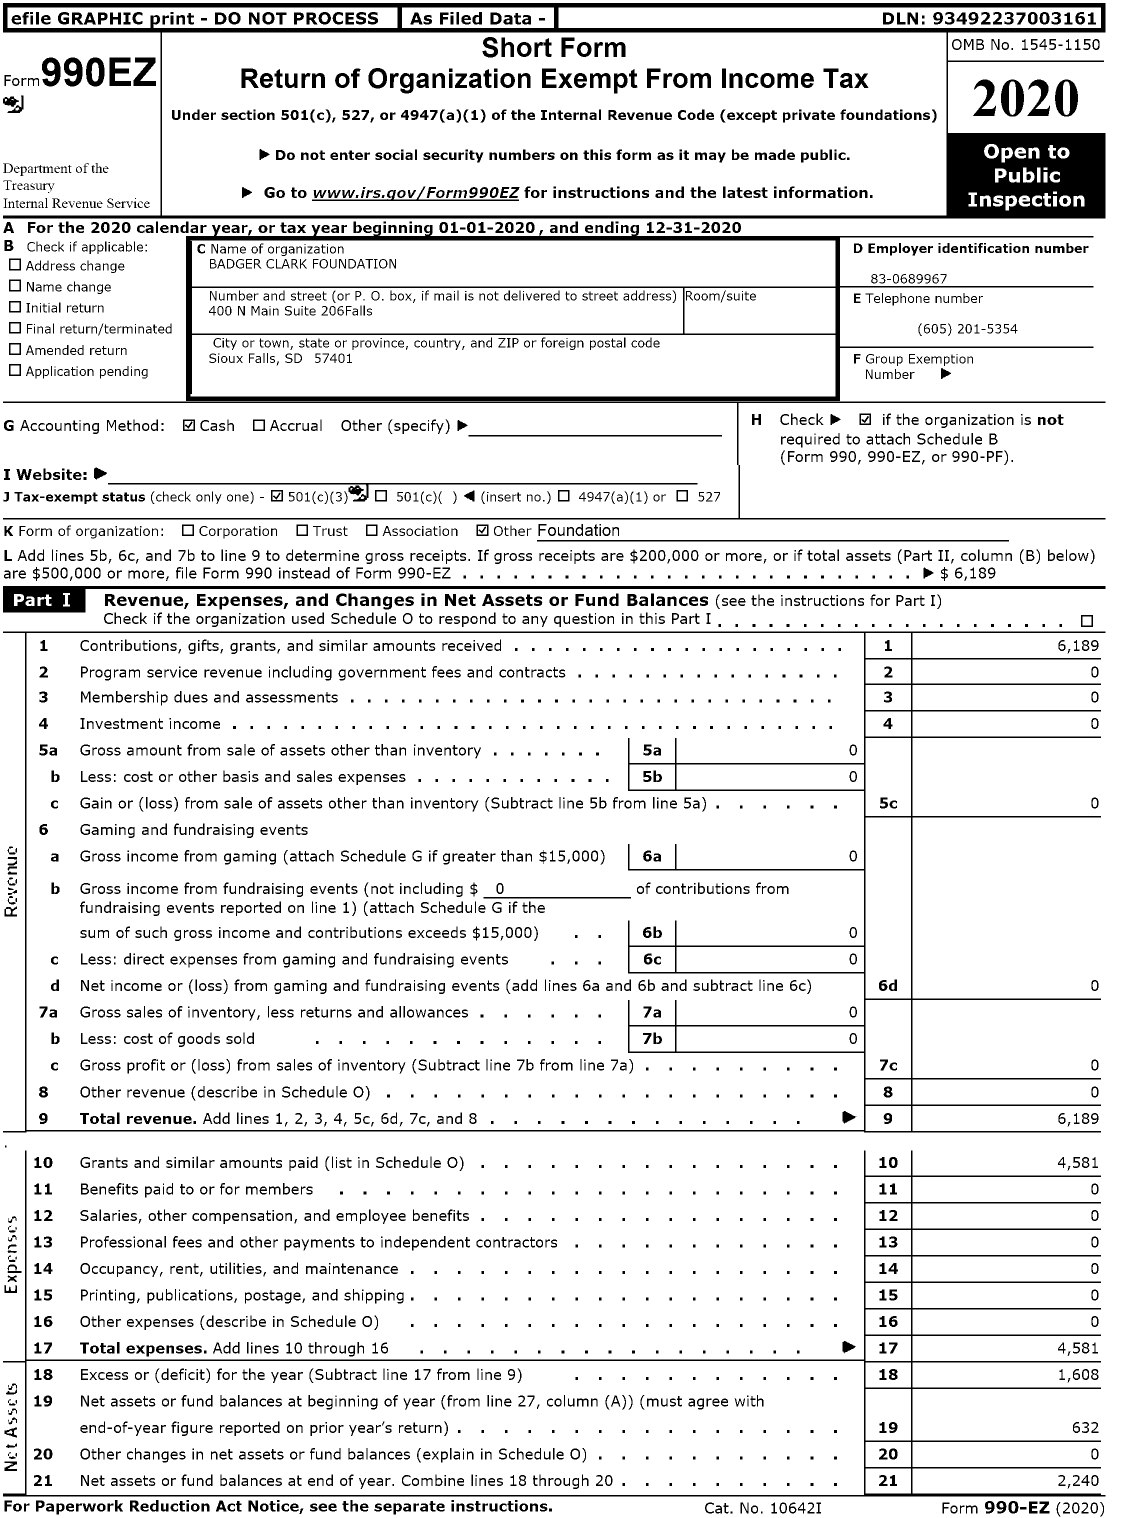 Image of first page of 2020 Form 990EZ for Badger Clark Foundation